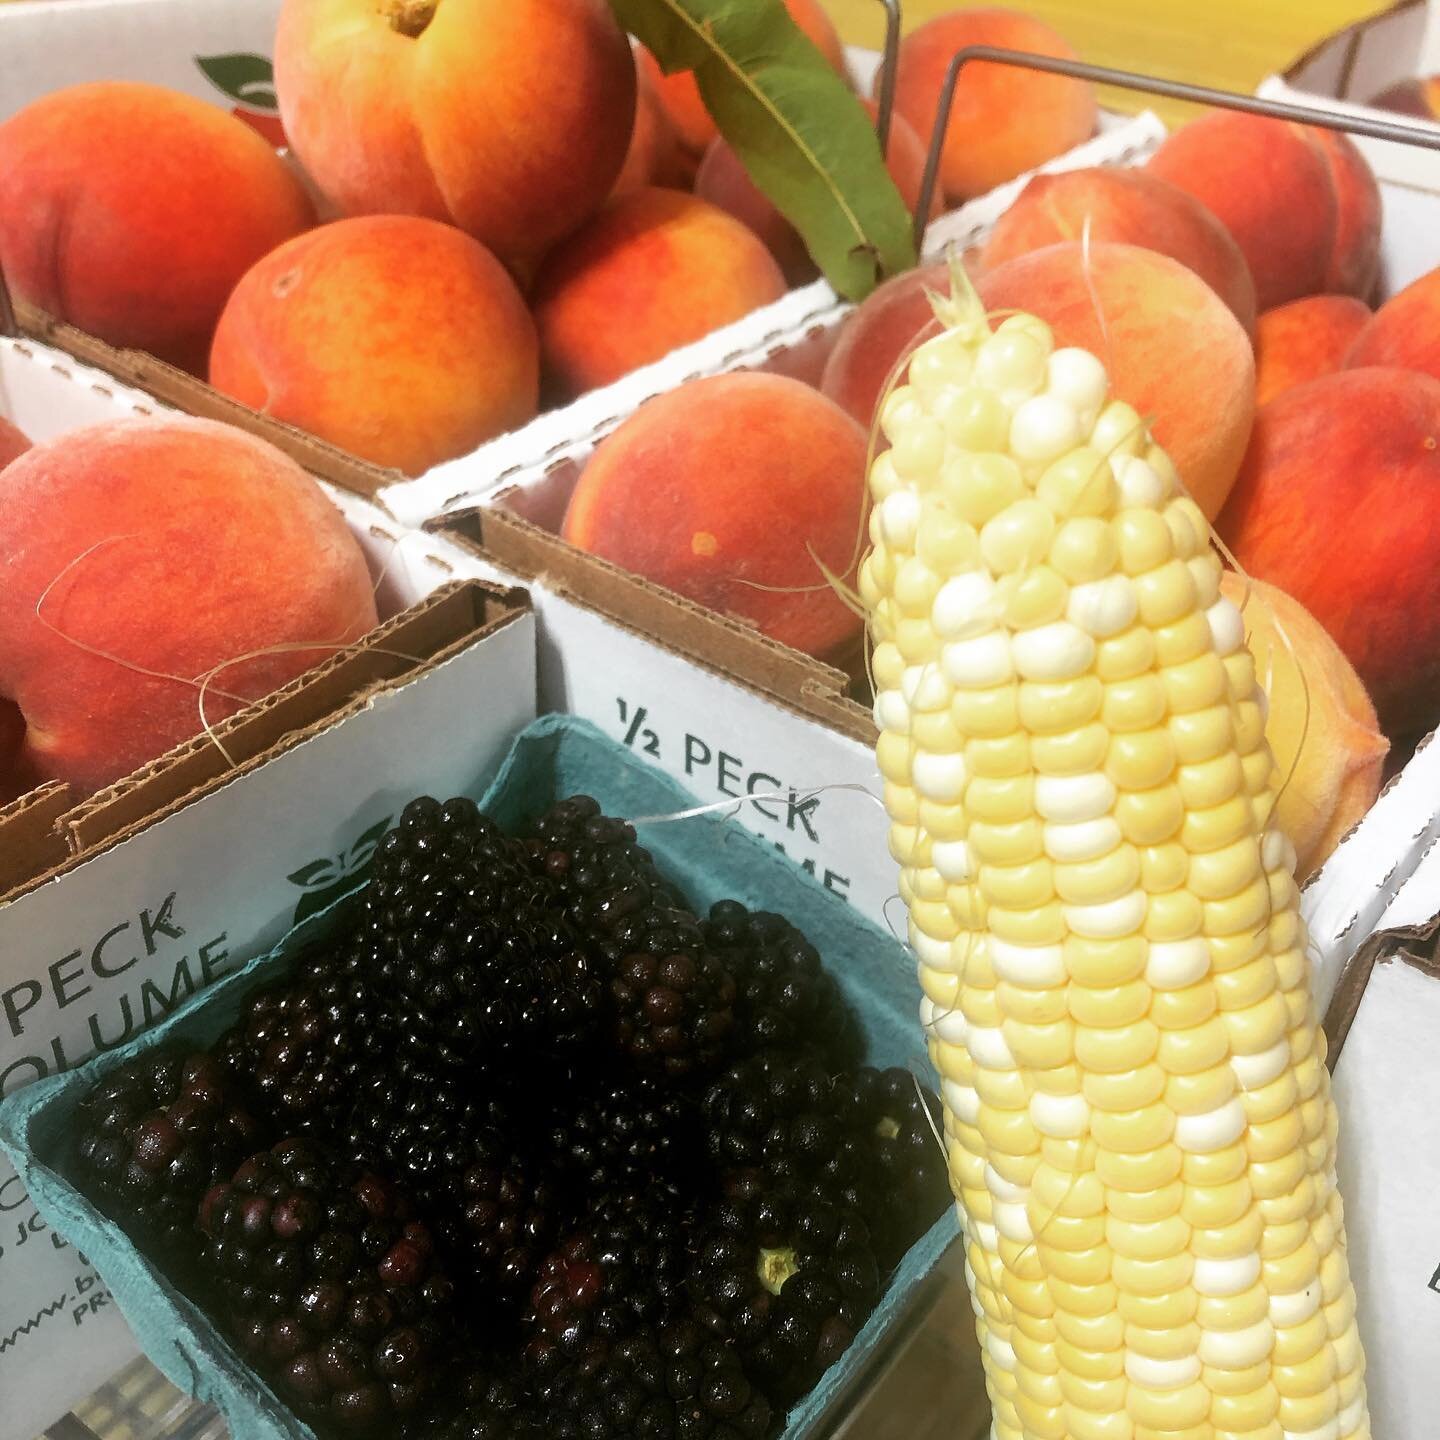 Ohio sweet corn and blackberries are now in the market along with Branstool peaches! There is no excuse not to eat well this time of year with easy access to local tomatoes, green beans, candy onions, potatoes, peppers, zukes and cukes (farmer talk L